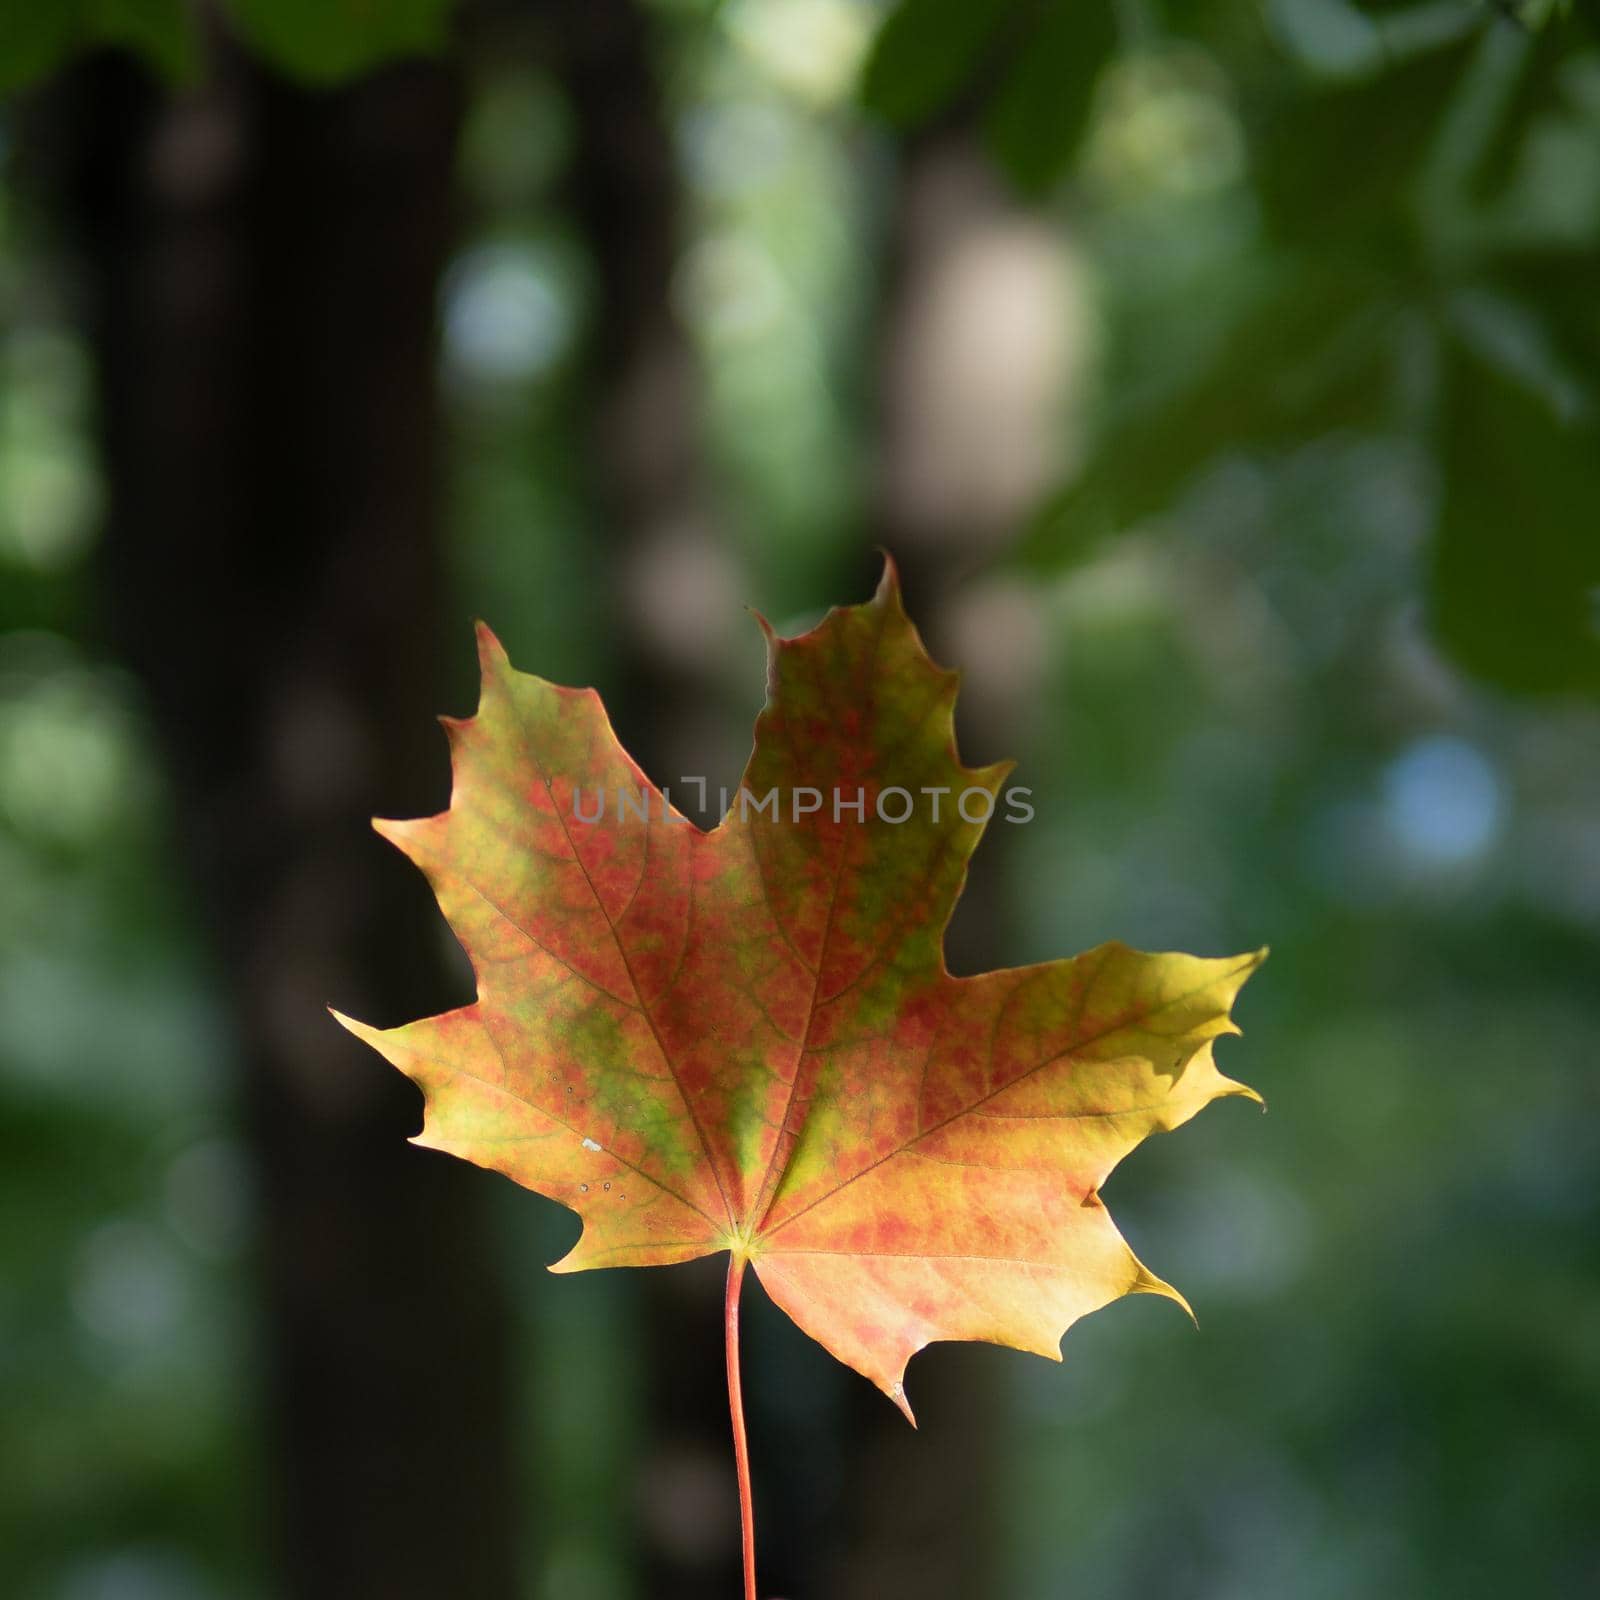 autumn background with bright yellow and red single leaf in center of dark background.